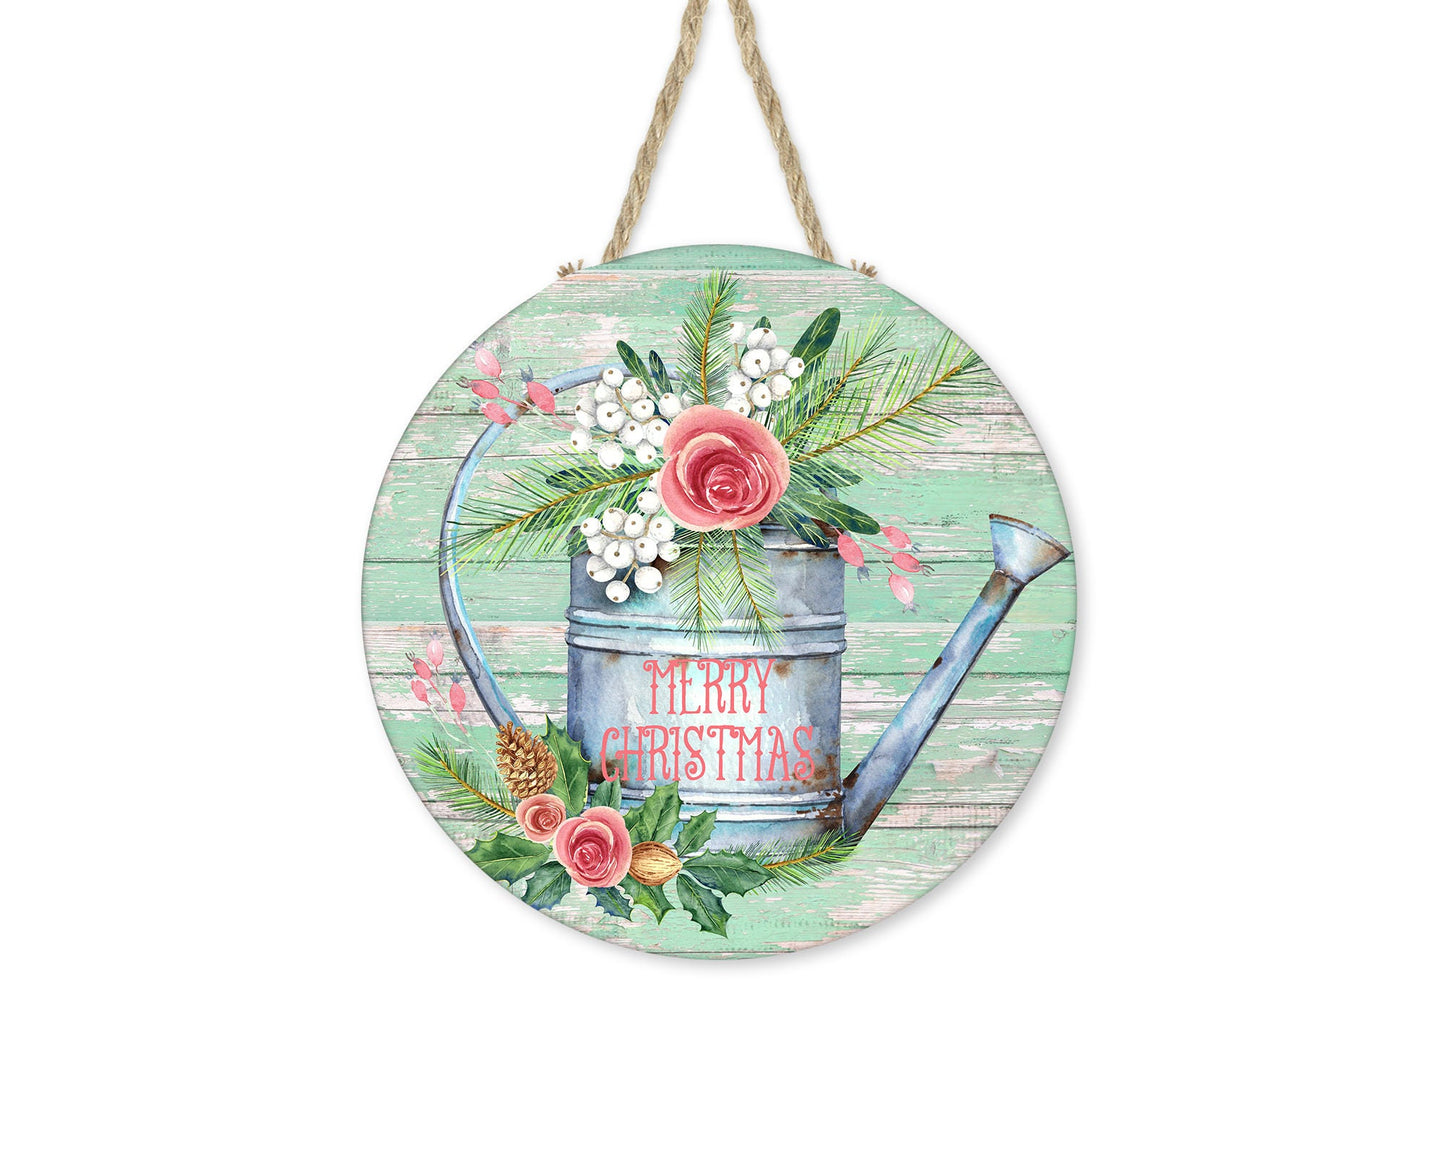 Merry Christmas Watering Can Round Printed Handmade Wood Sign Farmhouse Door Hanger Wreath Sign